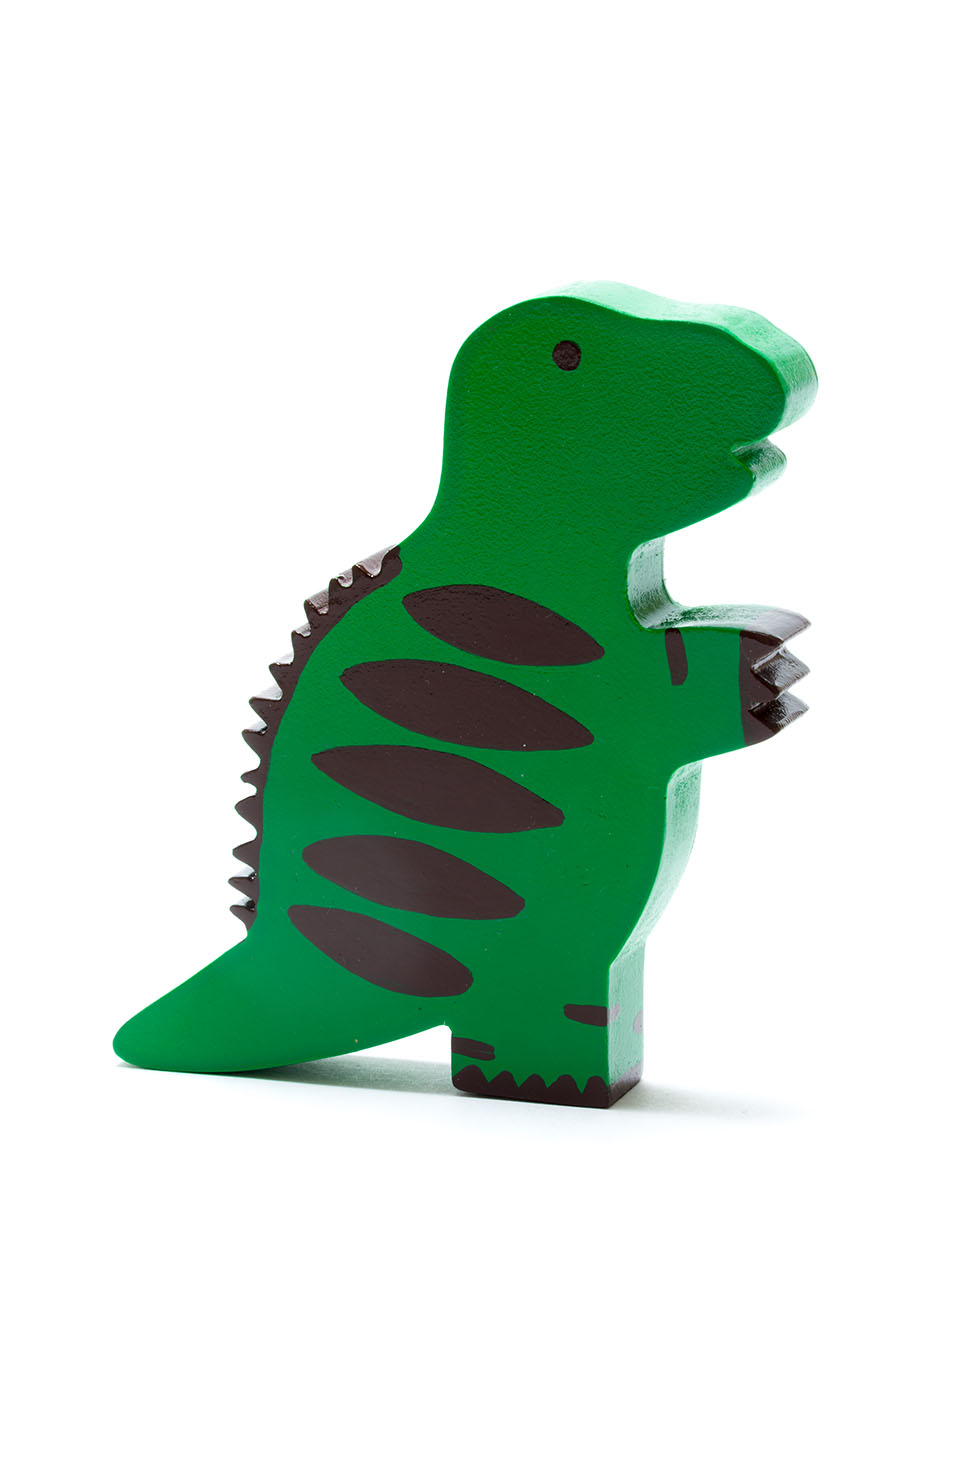 Wooden Dinosaur Toys for Toddlers